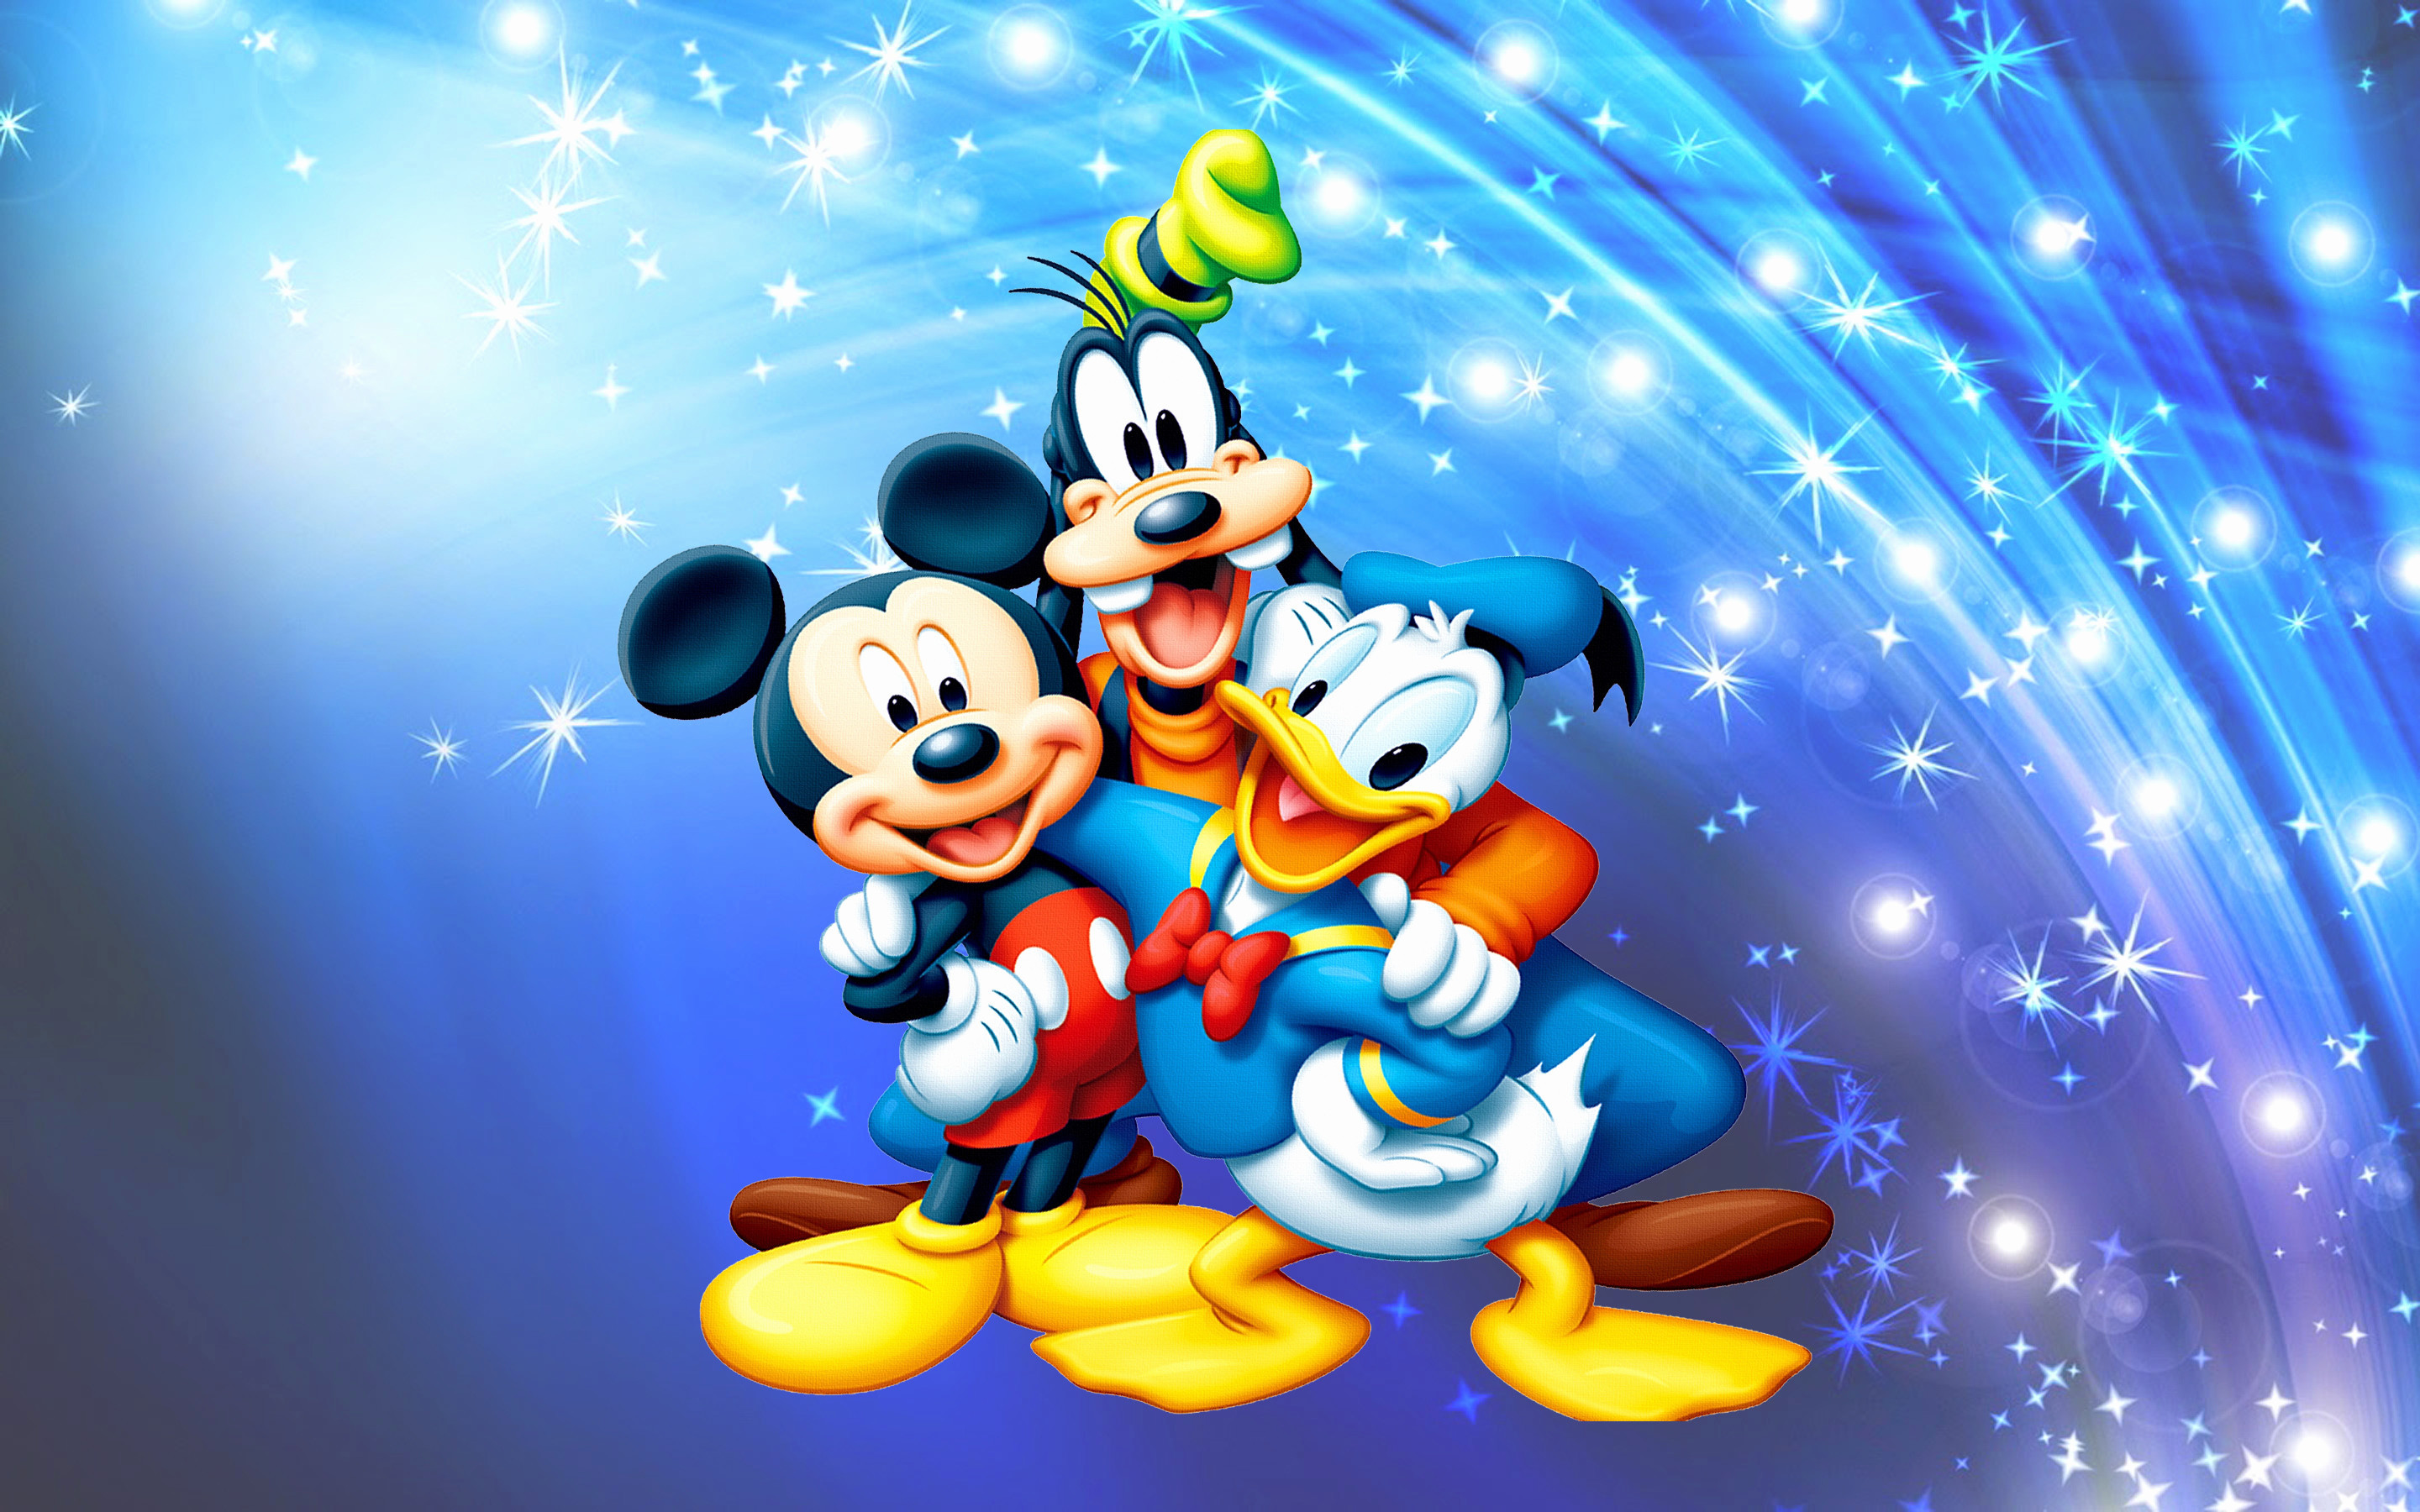 2880x1800 1920x1080 Disney Computer Wallpapers HD. Click on the image to view full  size and download.